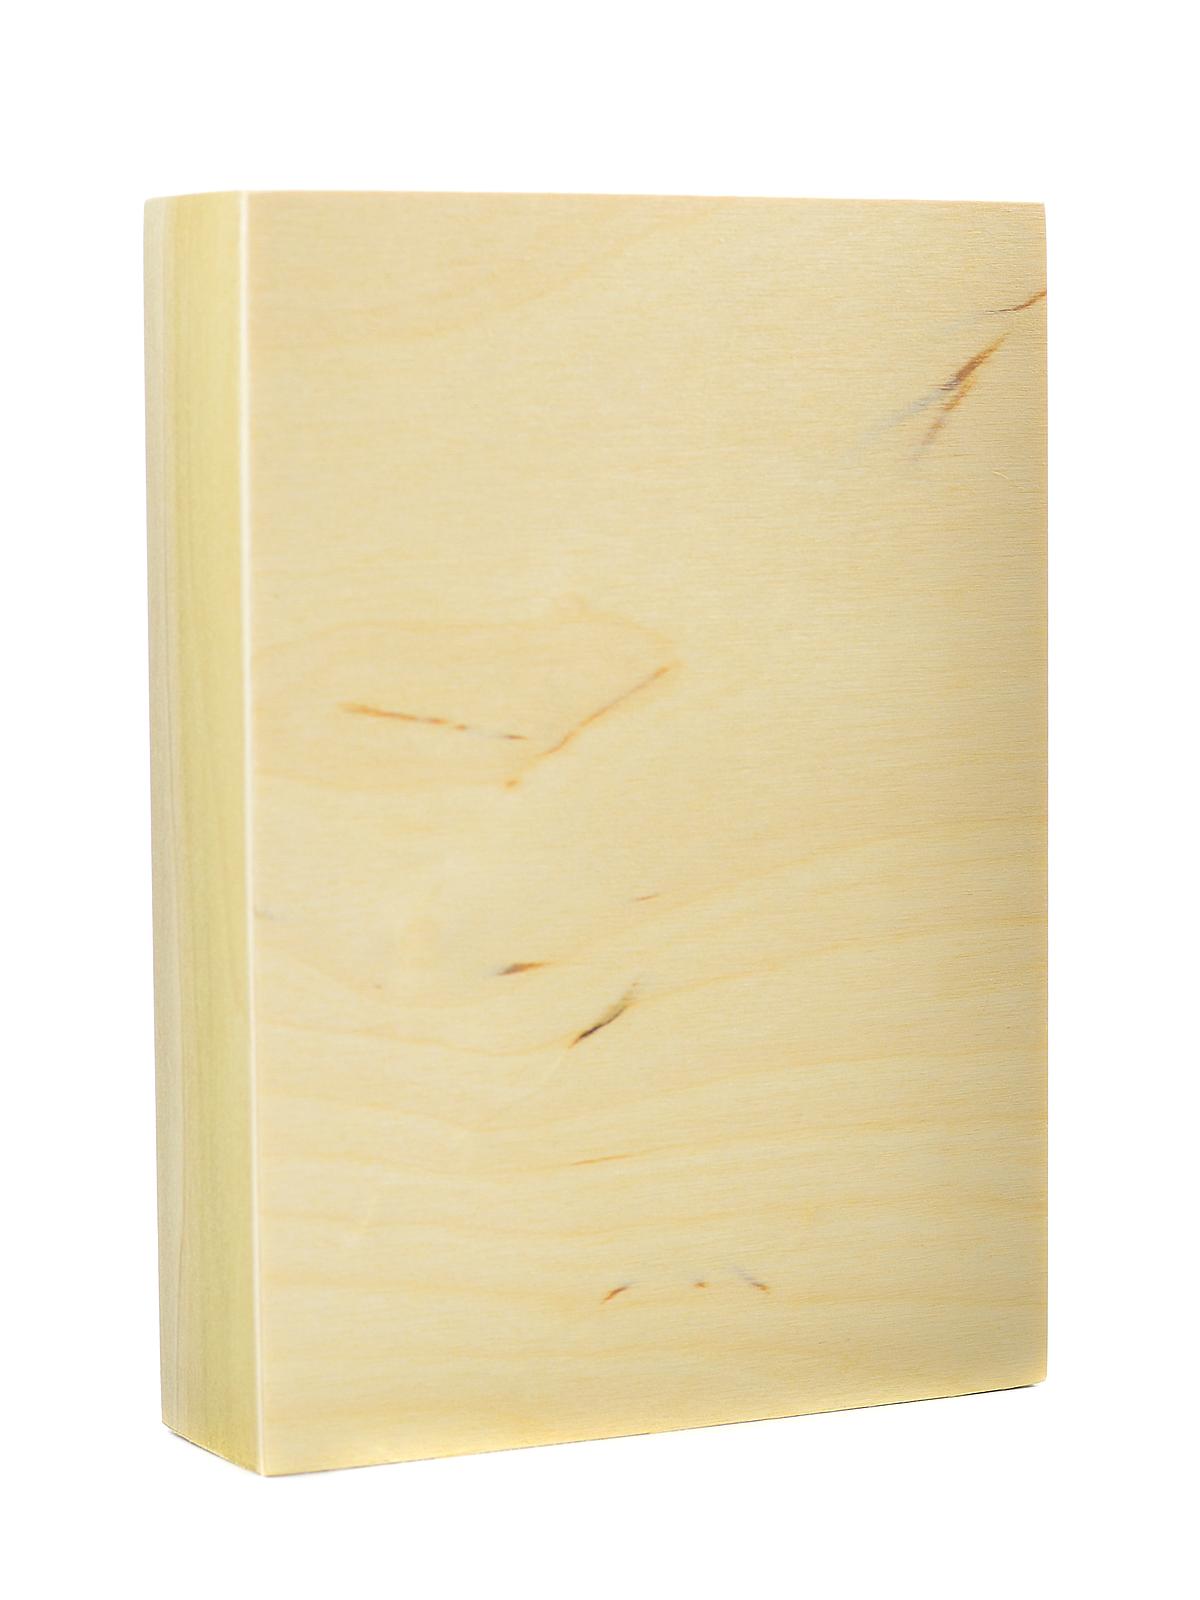 1 5 8 In. Cradled Wood Painting Panels 5 In. X 7 In.